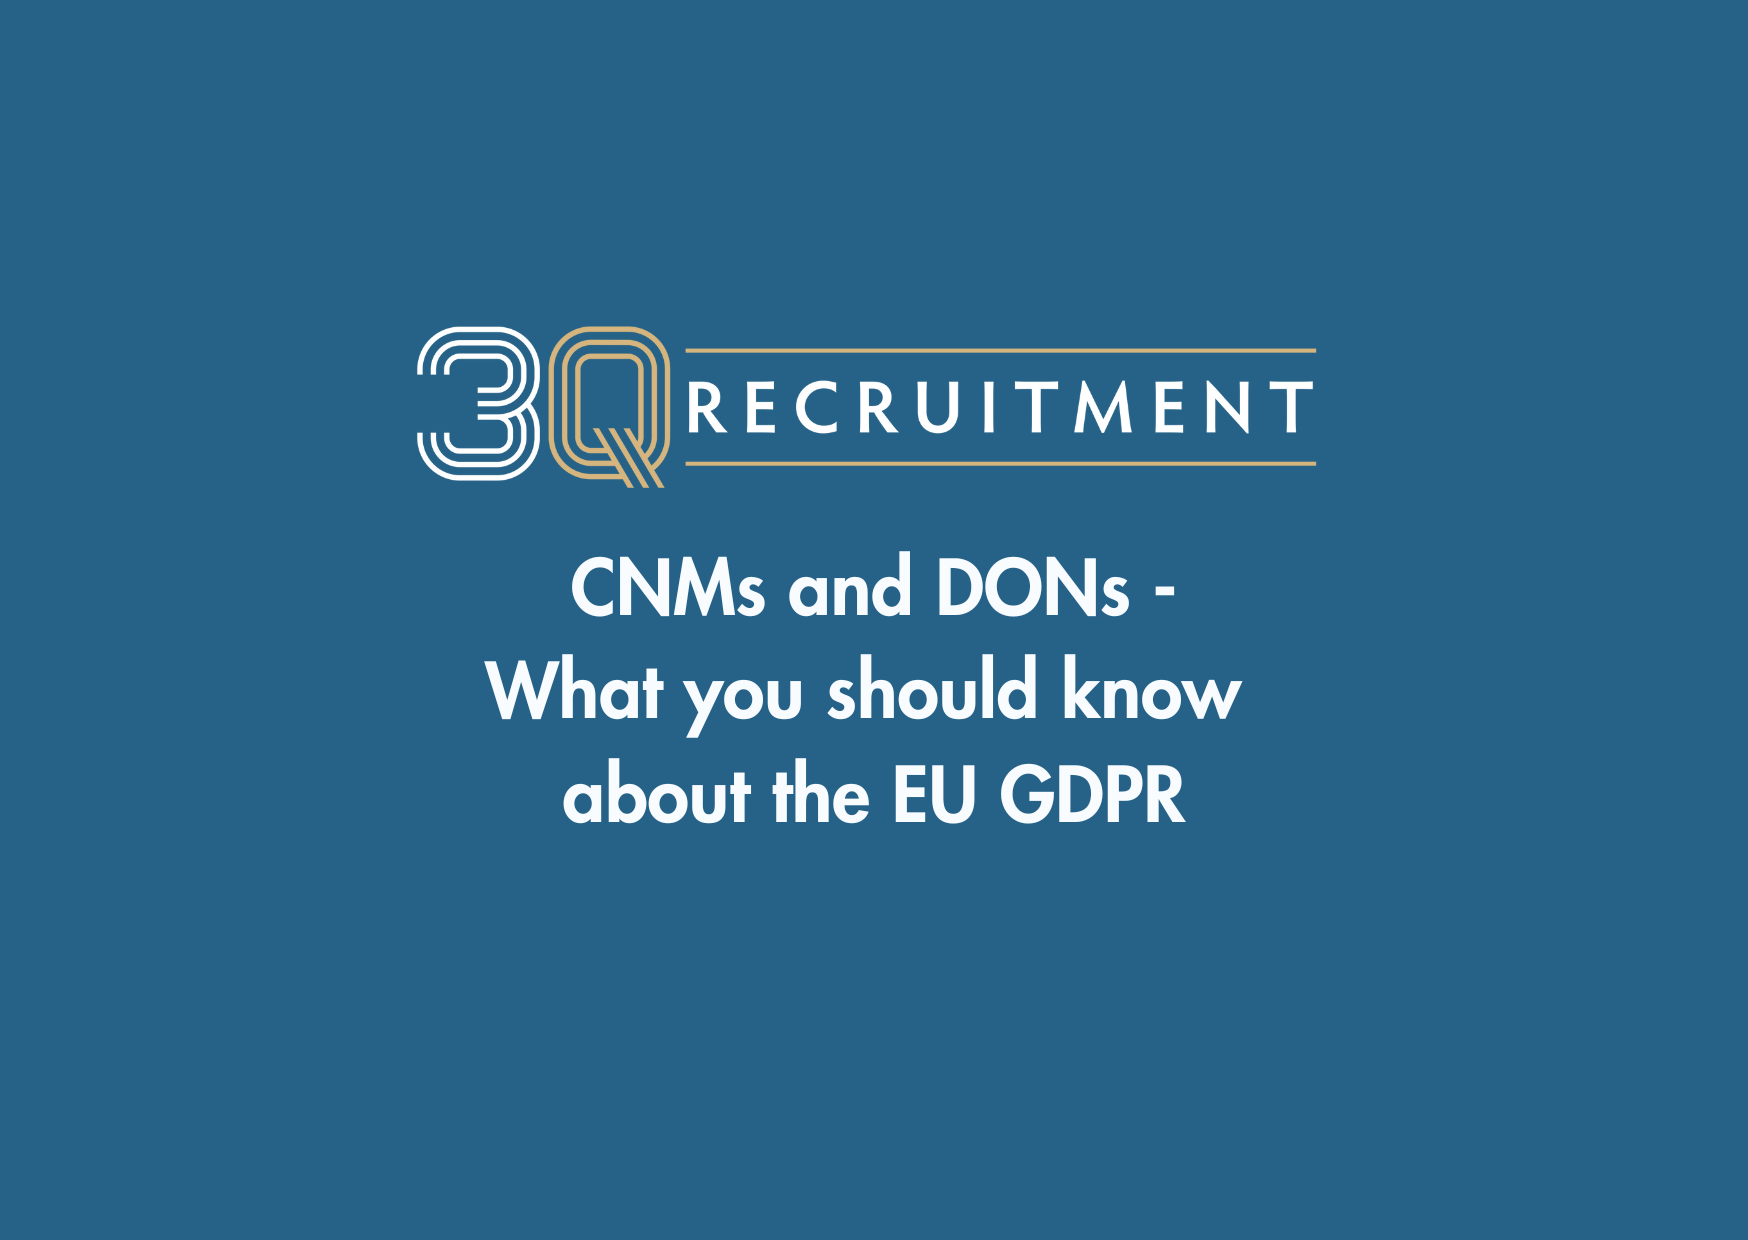 3Q Recruitment CNMs and DONs - What you should know about the EU GDPR